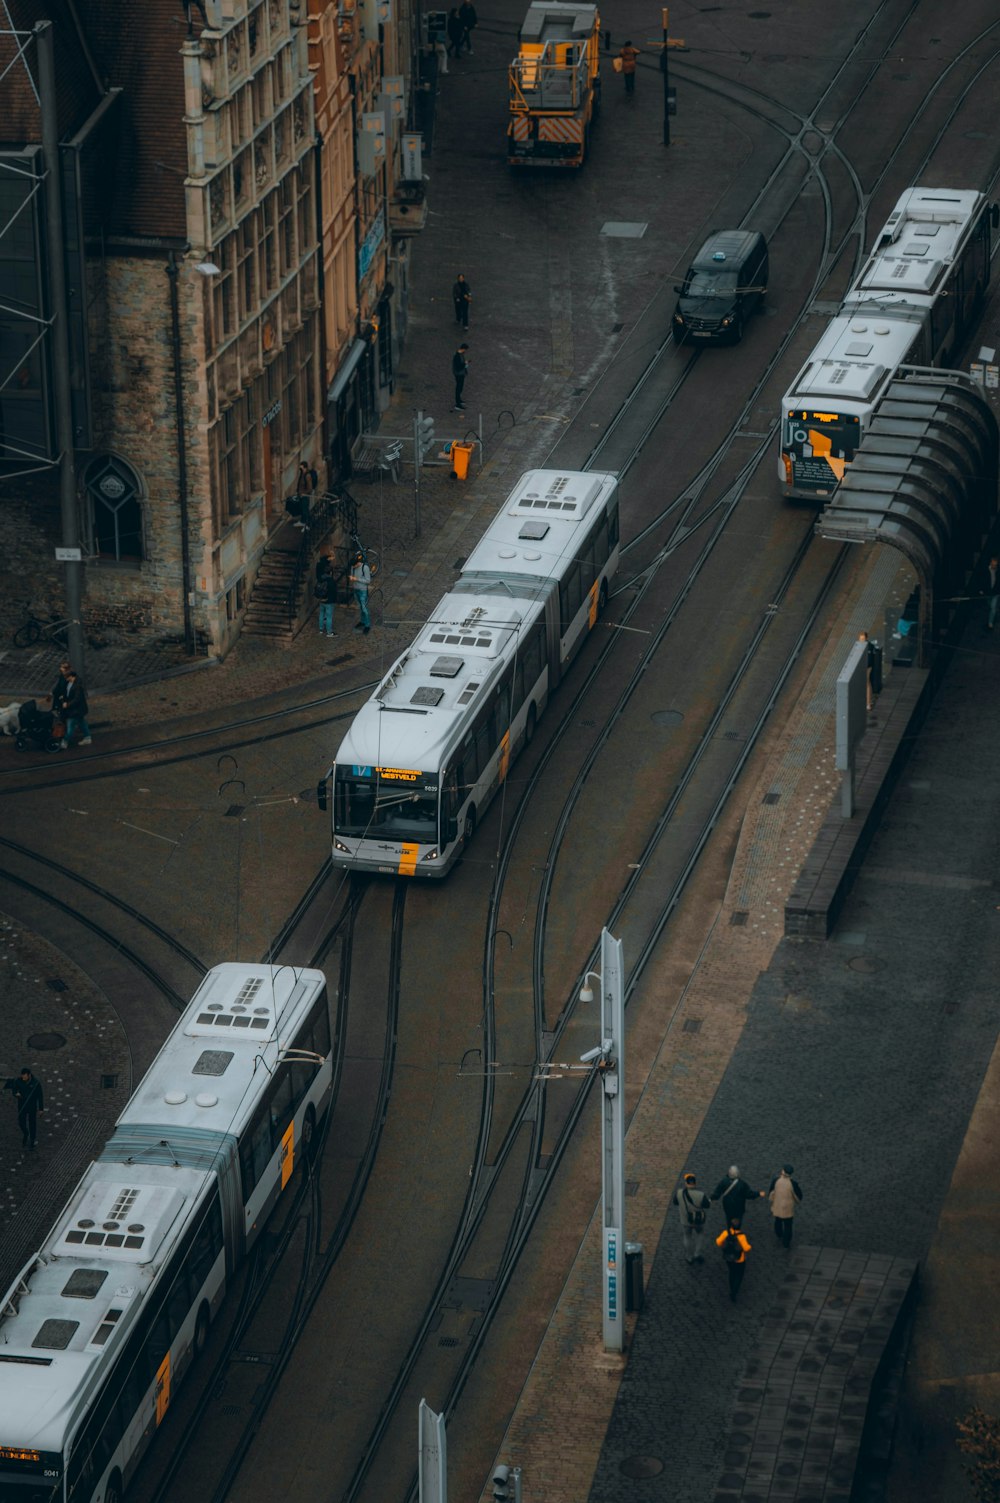 a group of buses parked next to each other on a street